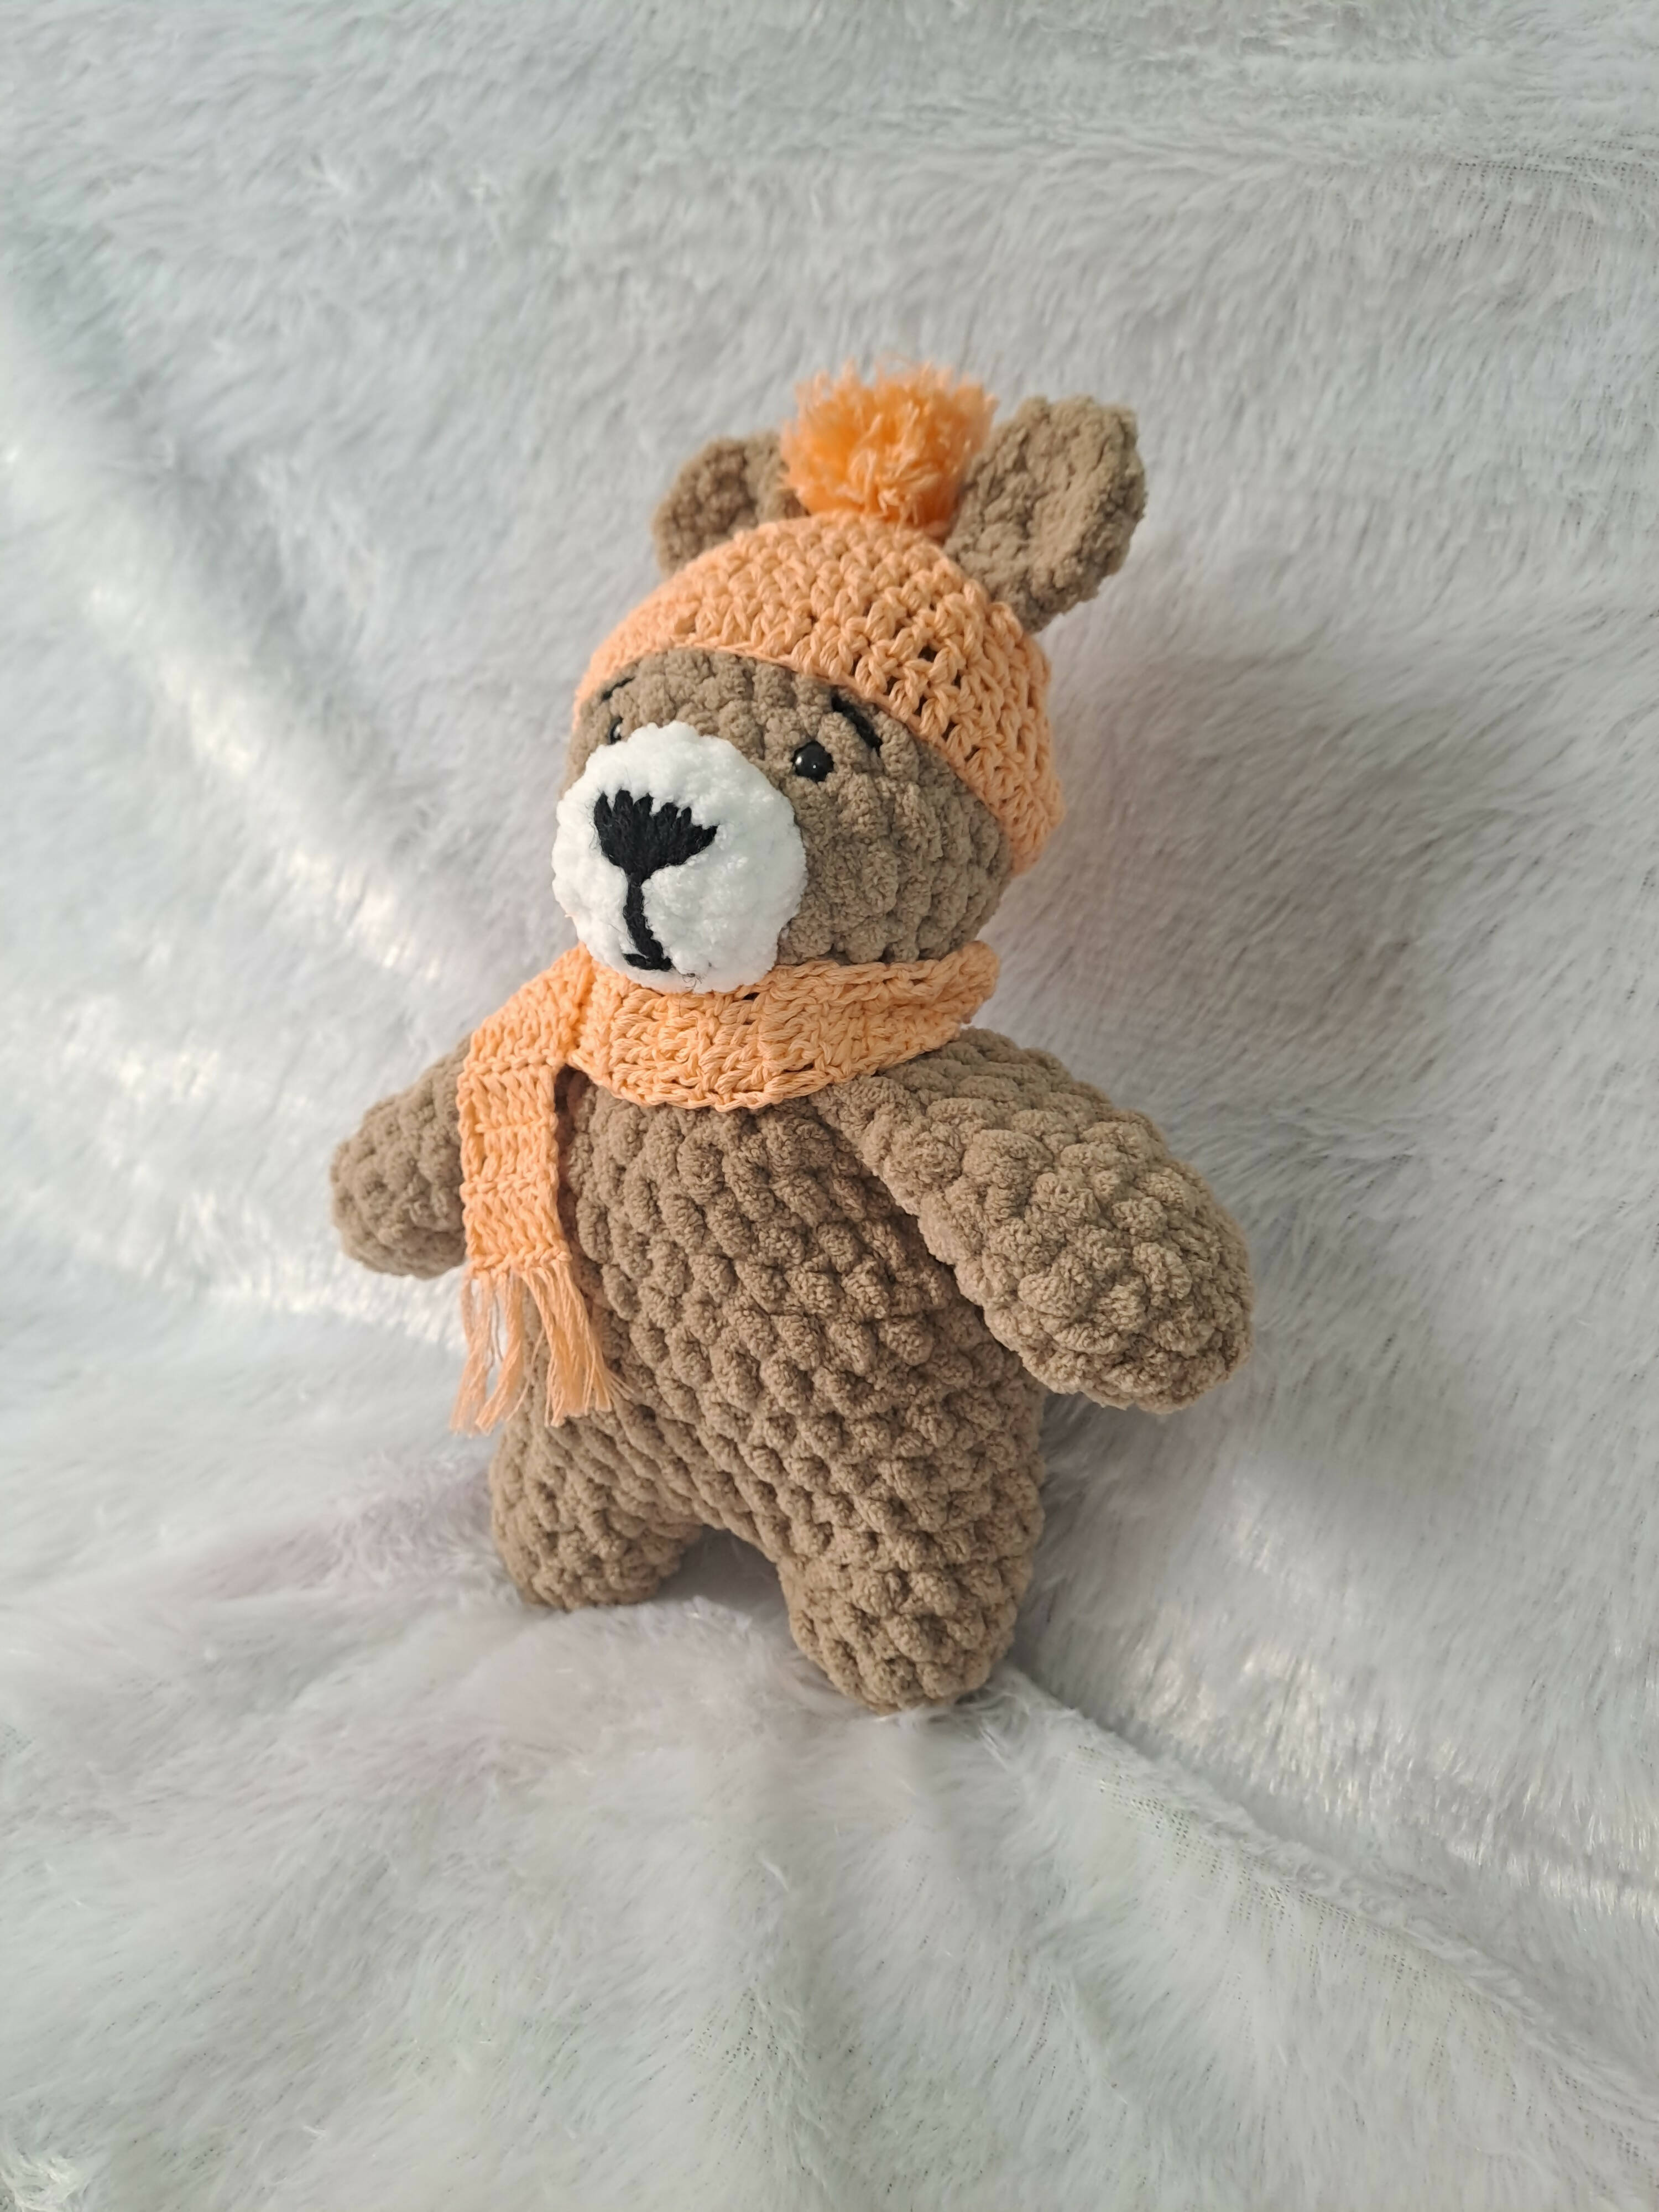 Give the gift of cuddles with the Crochet Plushie Bear—a lovable companion crafted with soft yarn and sweet details, sure to become a cherished favorite.